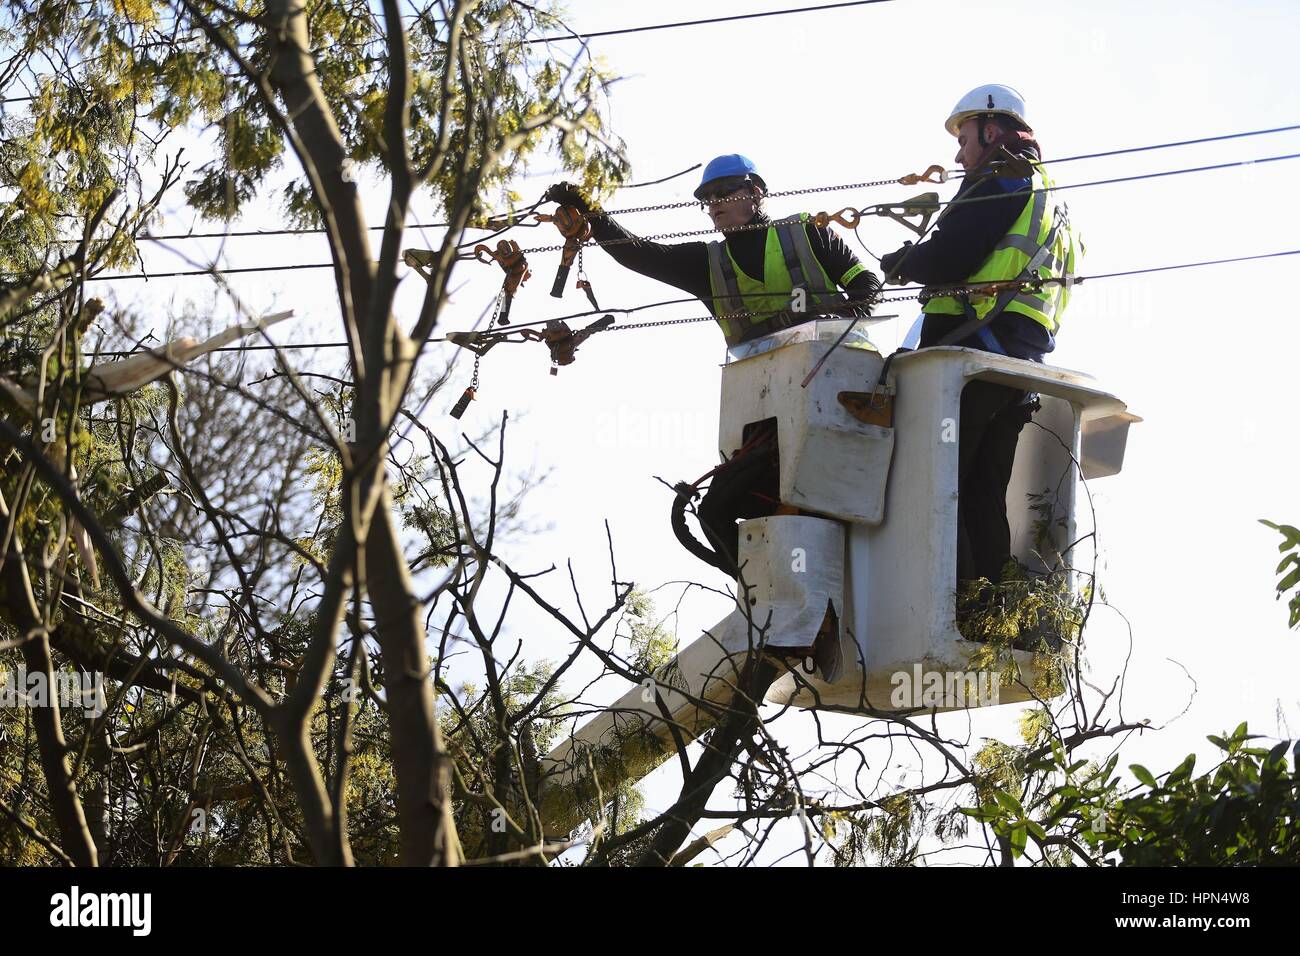 ESB workers attend to power lines damaged by a fallen tree as allmost 46,000 Irish households woke up to no electricity after violent gusts battered large swathes of the country through the night. Stock Photo